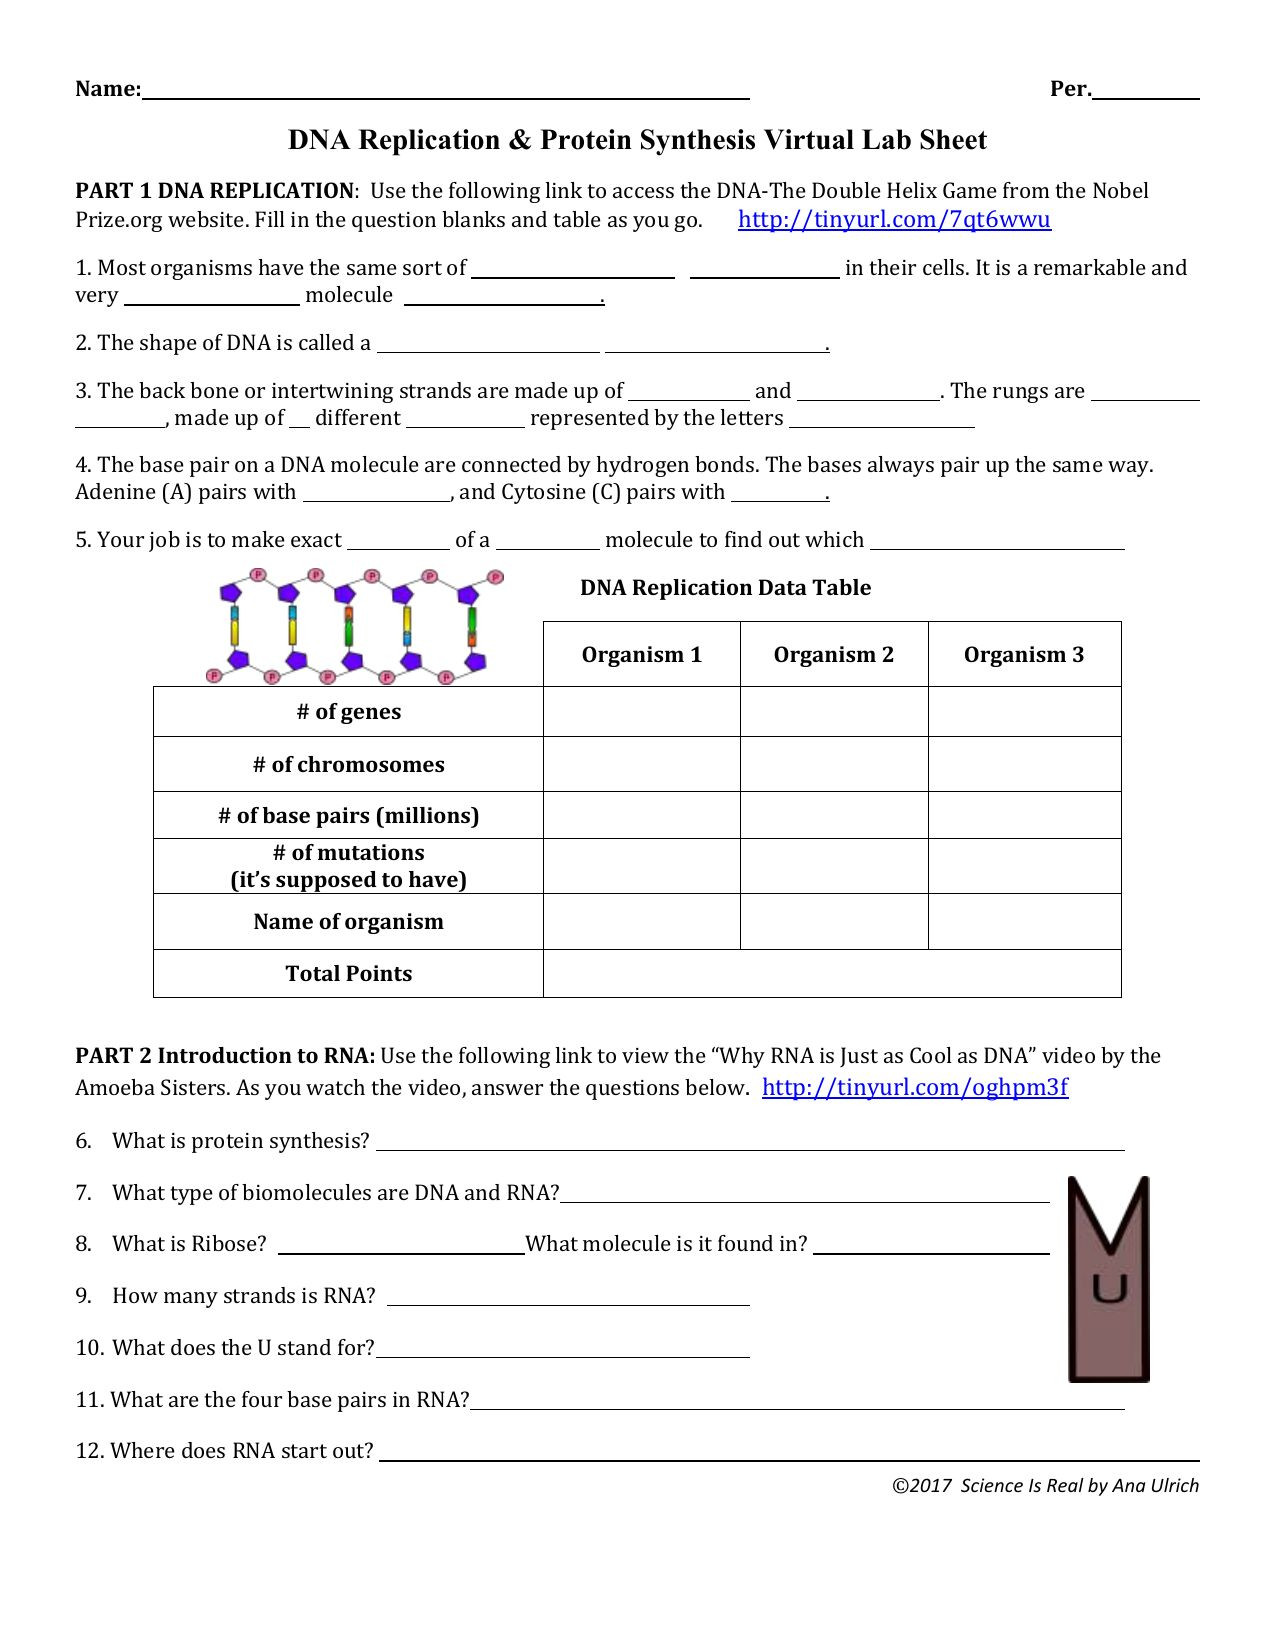 Protein Synthesis Practice Worksheet Dna Replication Protein Synthesis Worksheet